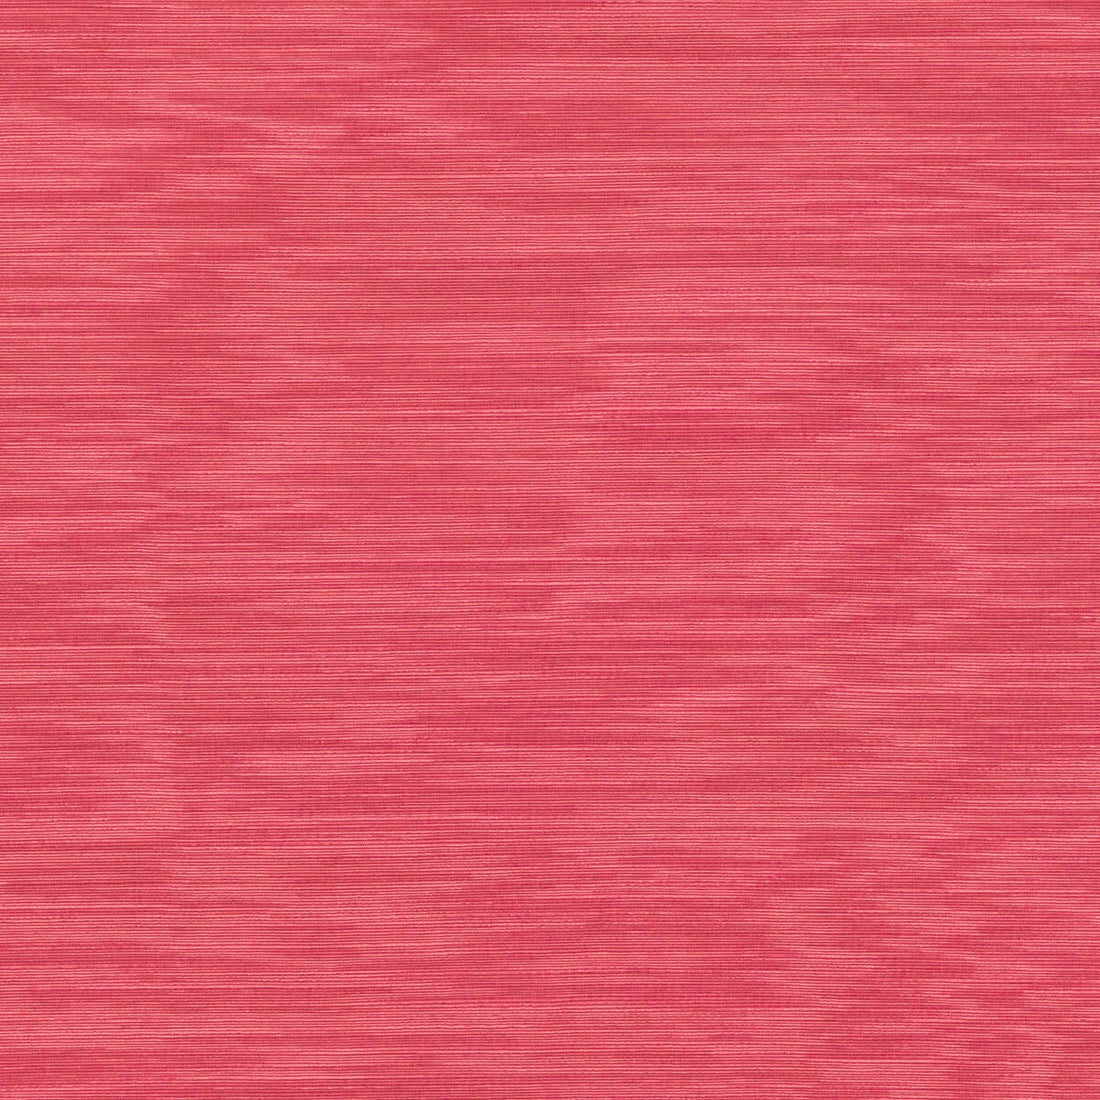 Cernay Moire fabric in pink color - pattern 8019119.7.0 - by Brunschwig &amp; Fils in the Alsace Weaves collection